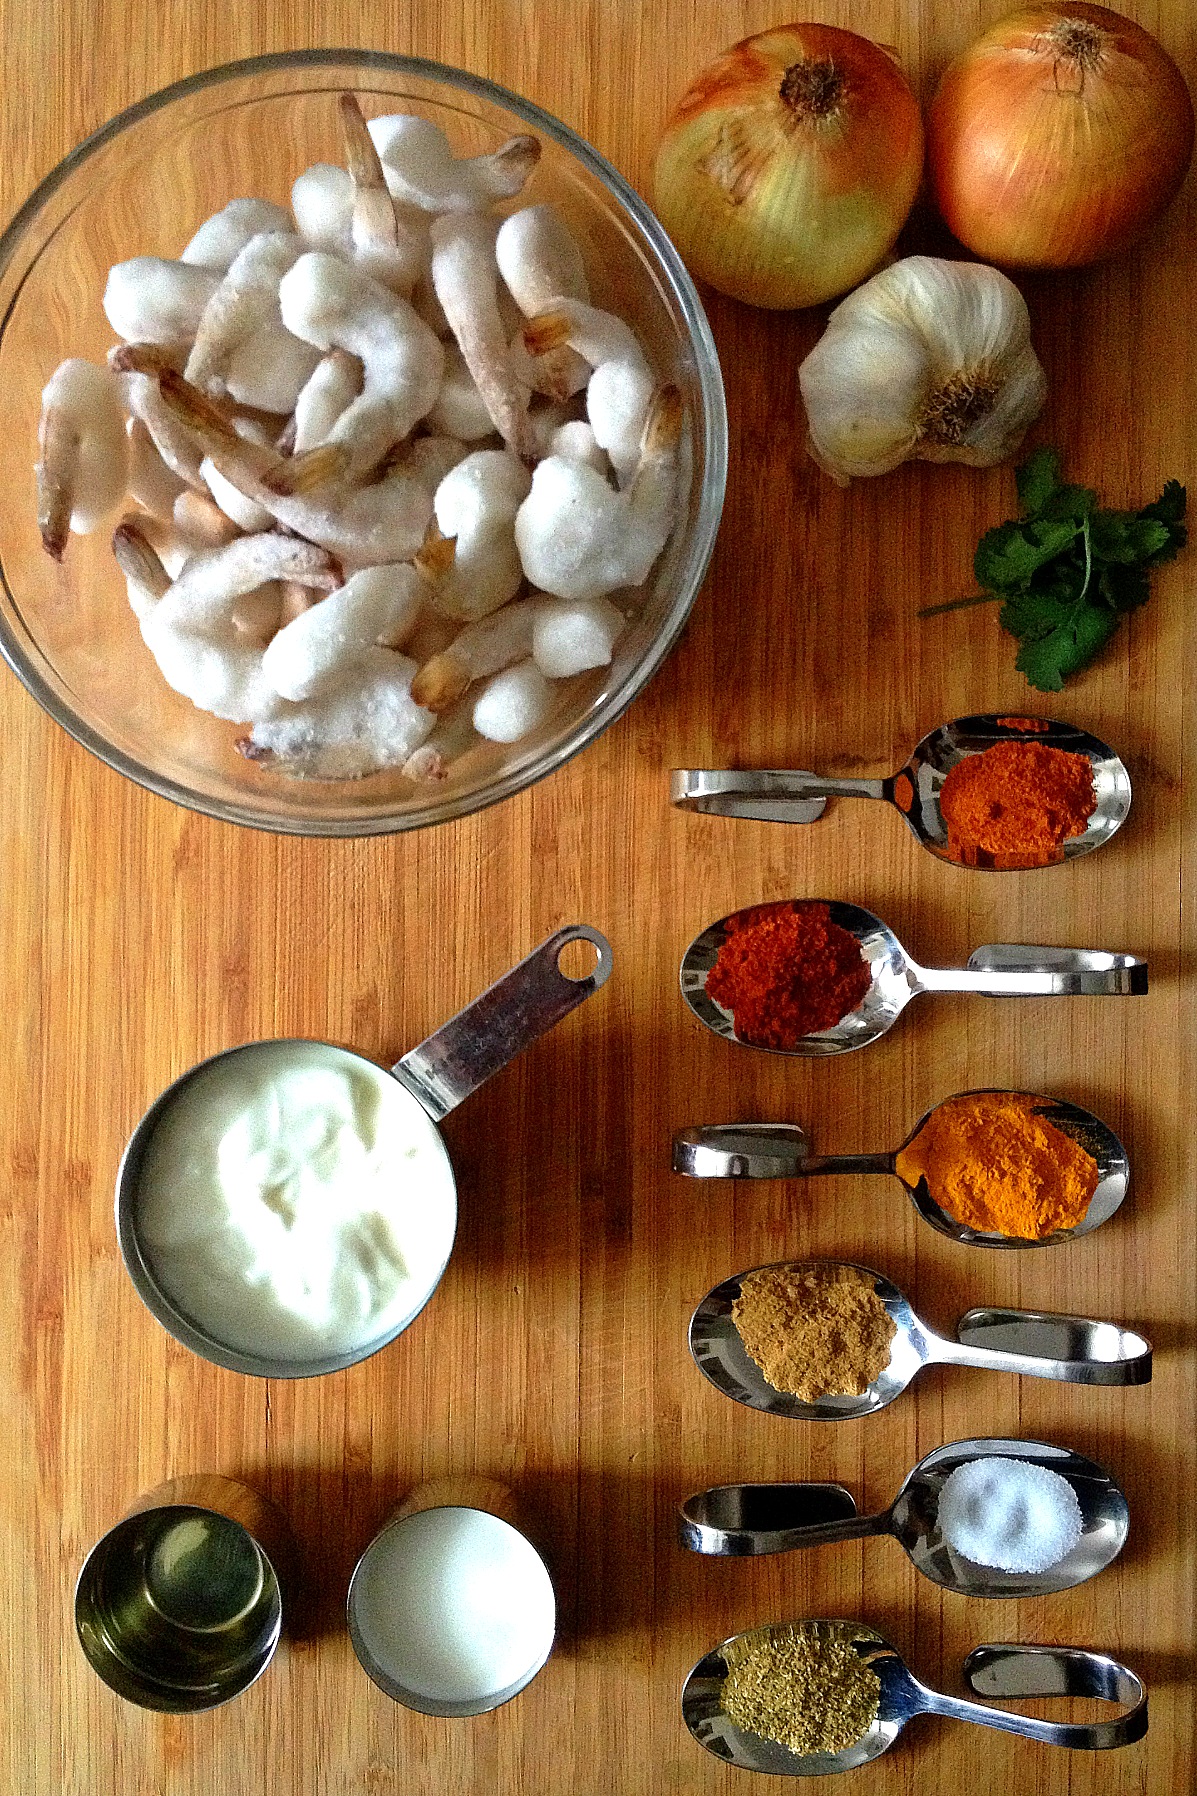 Ingredients for Indian Shrimp Curry